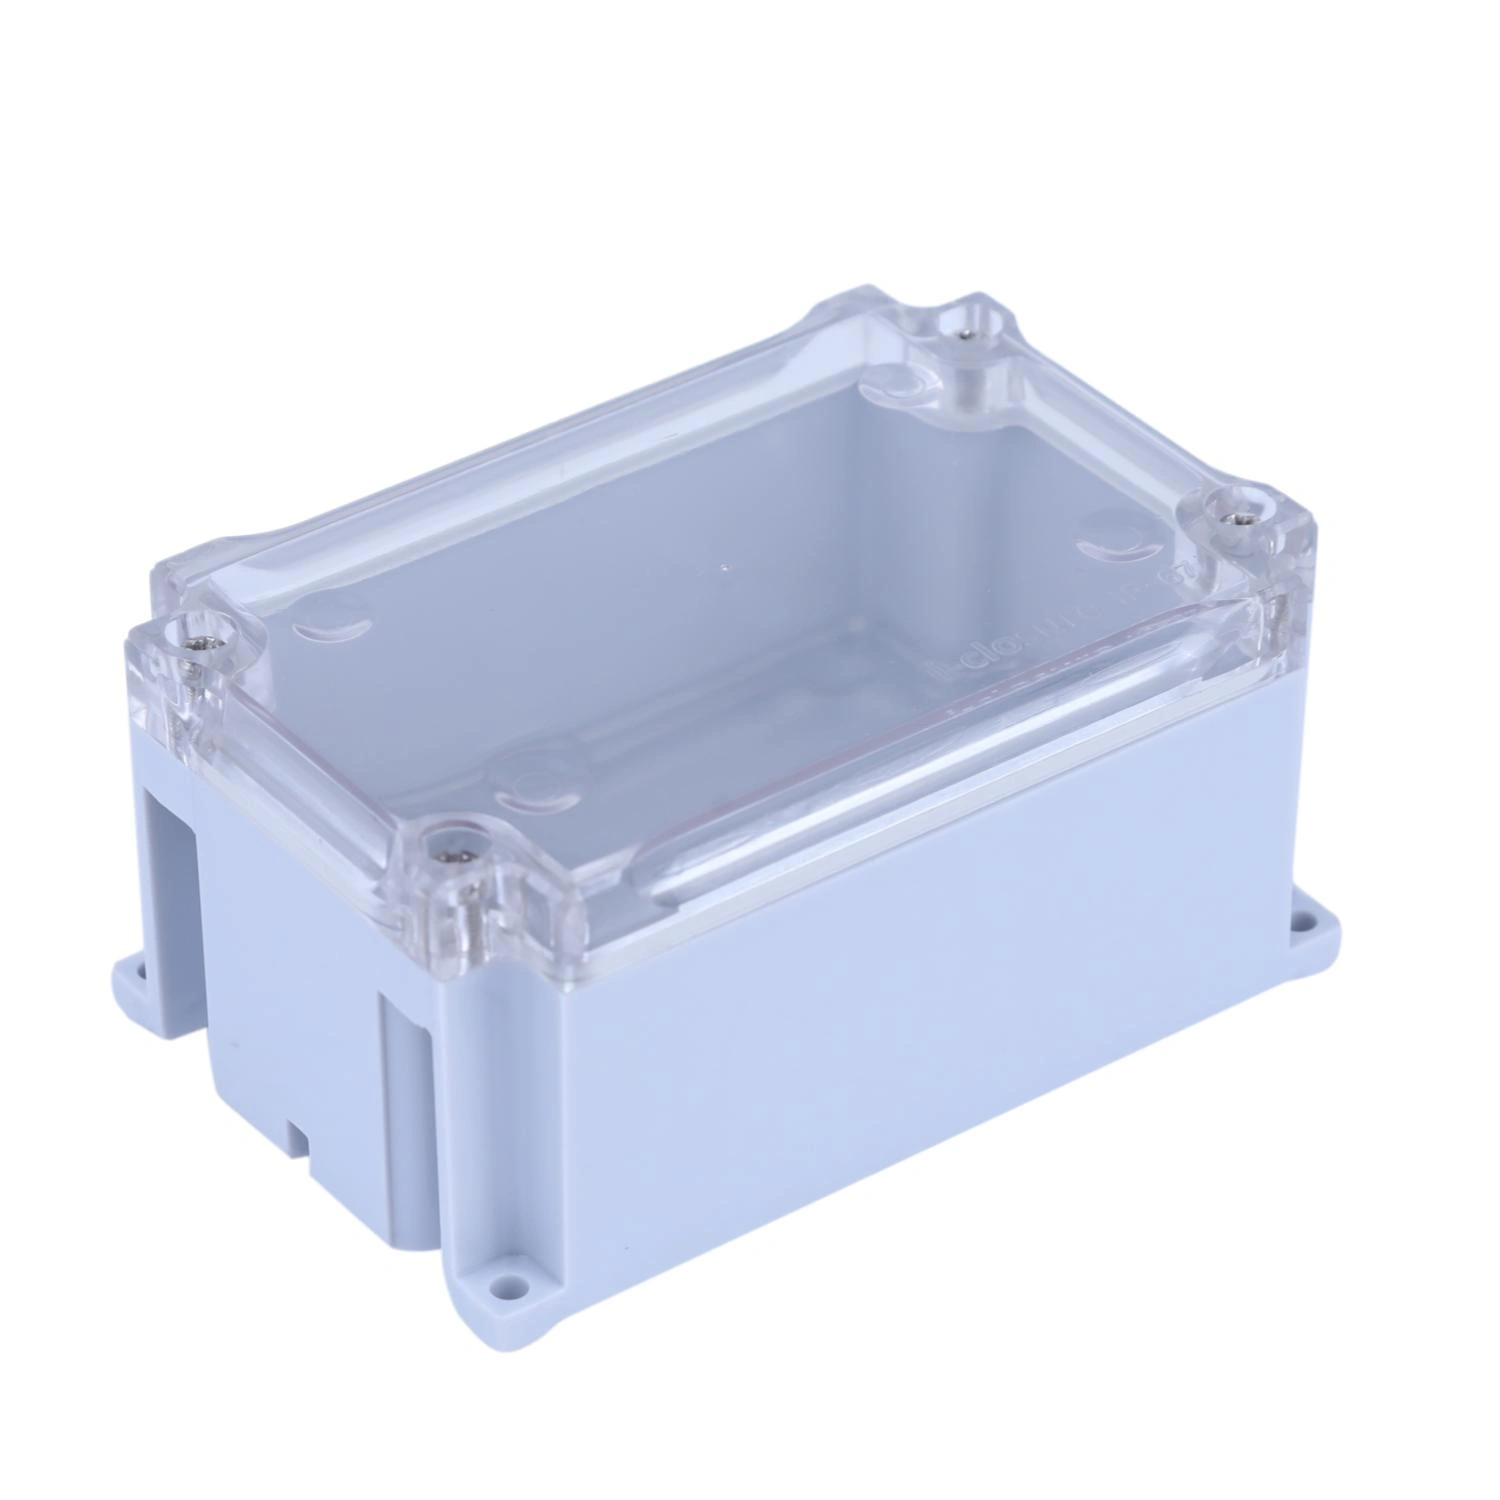 ABS Enclosure 120 x 80 x 55 mm Clear IP67-2